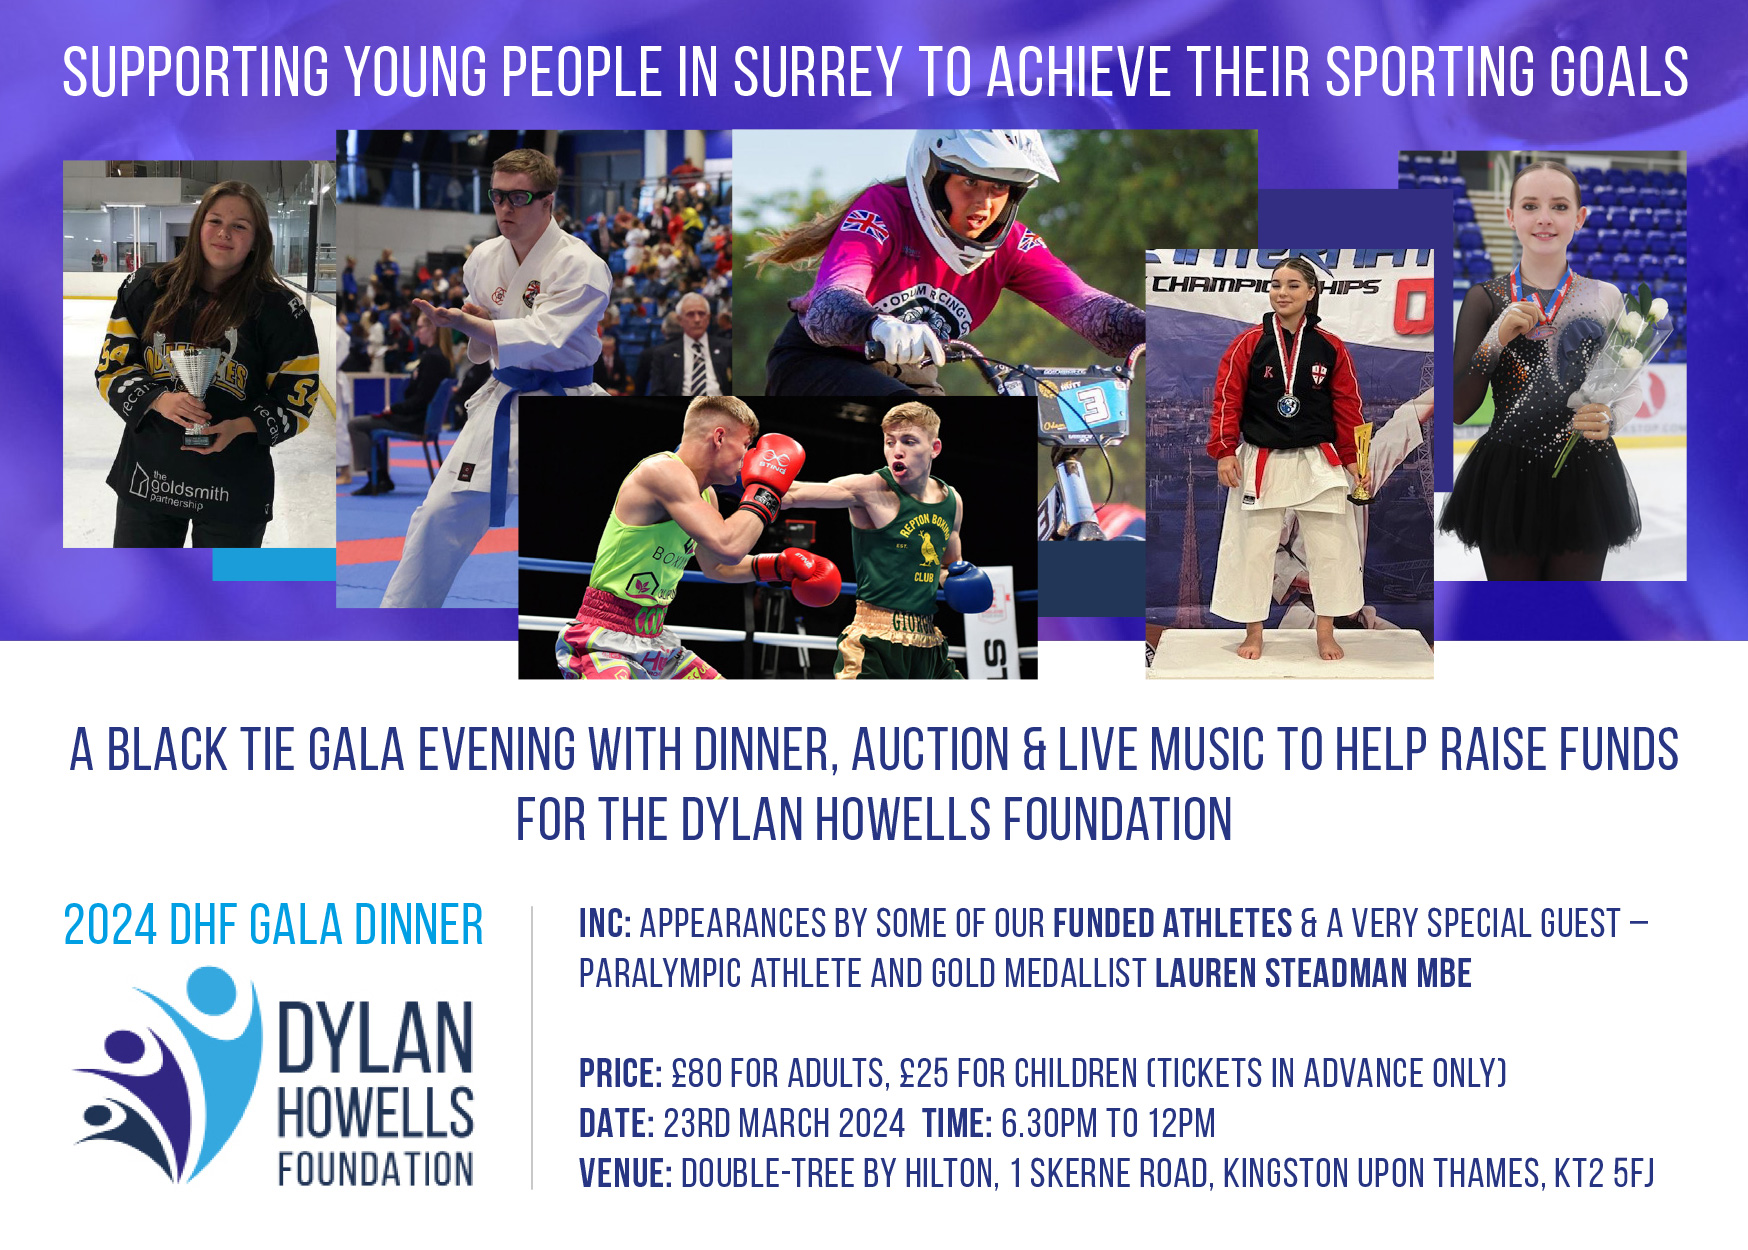 DHF Gala Dinner & Auction – 23rd March 2024